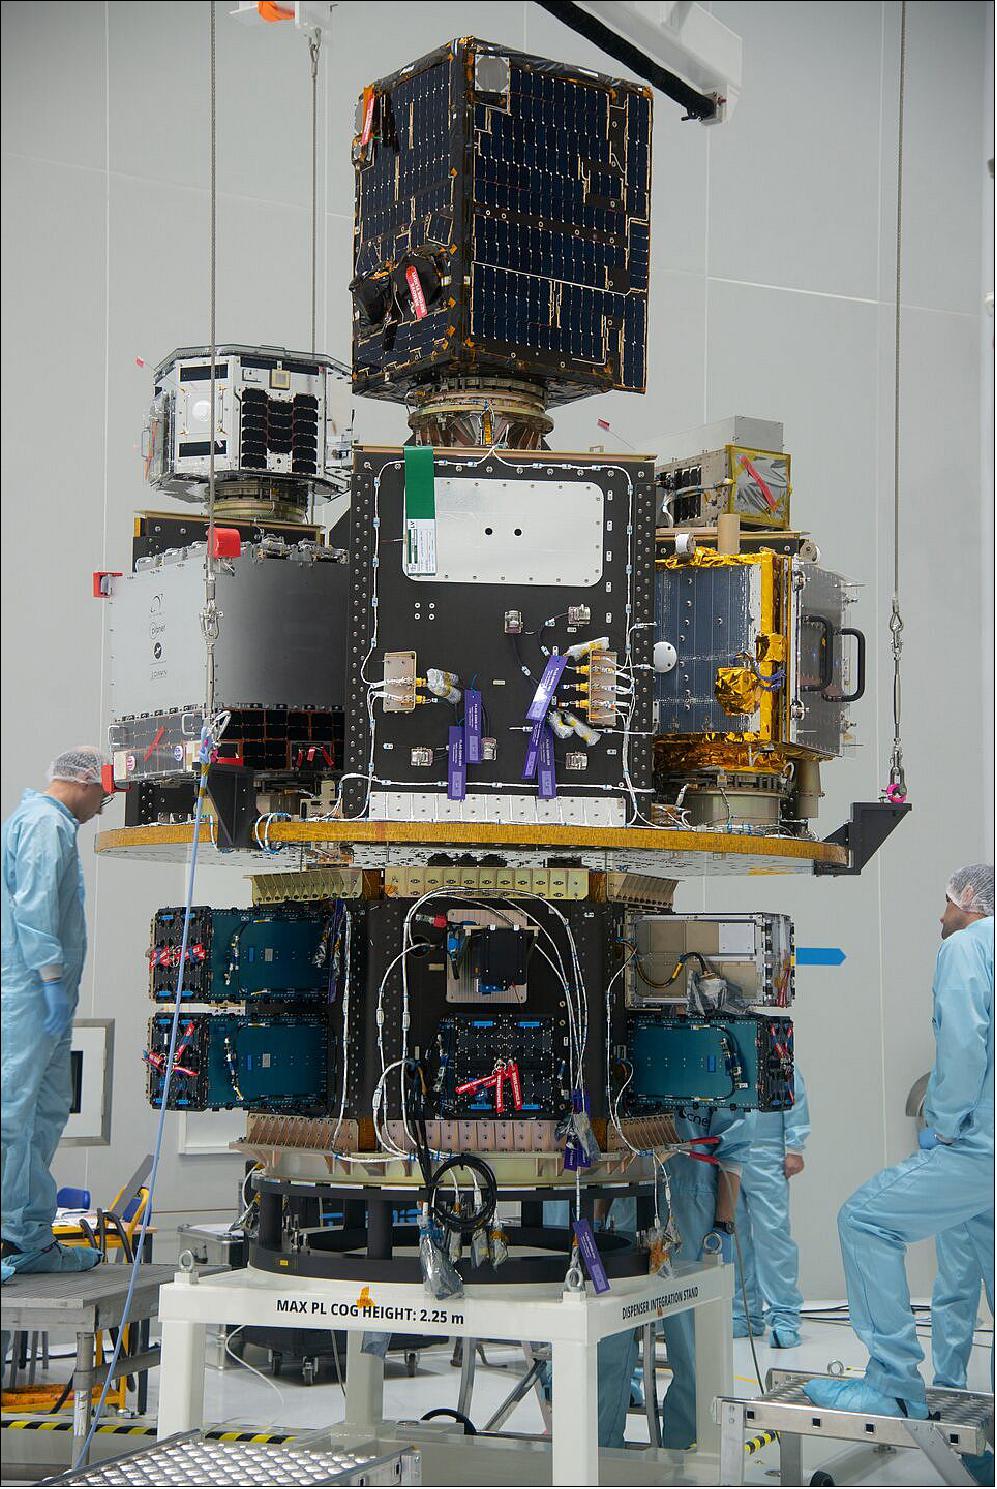 Figure 15: Satellites being integrated onto the SSMS payload dispenser (image credit: ESA, M. Pedoussaut)